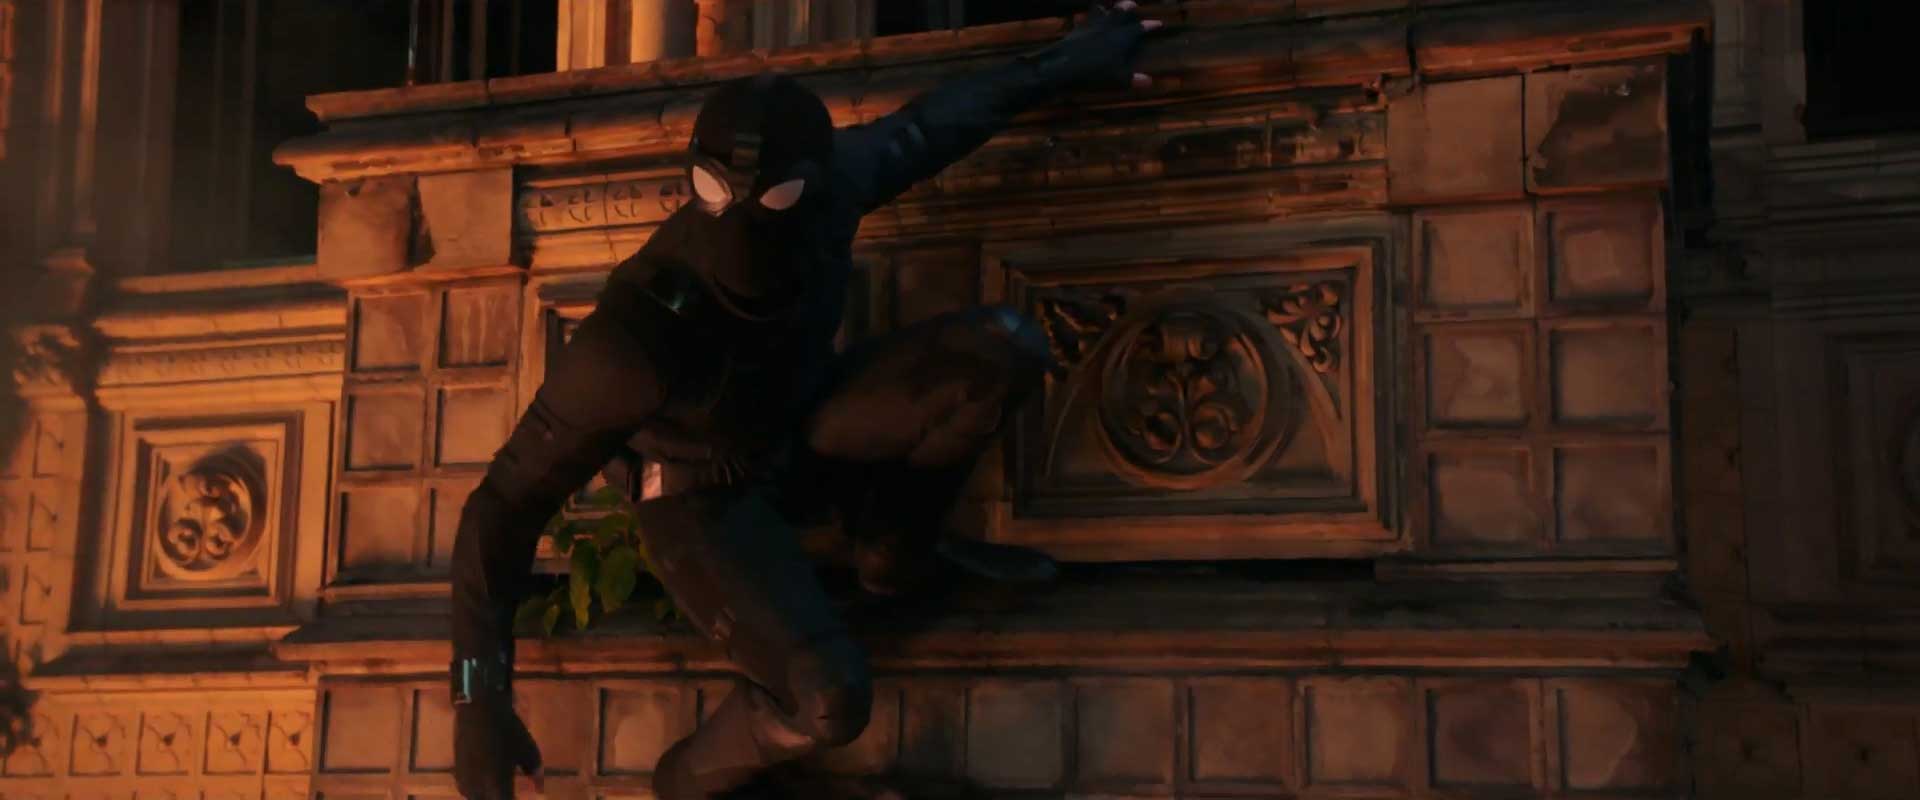 Spider-Man Far From Home Trailer 2 Breakdown - Stealth Suit